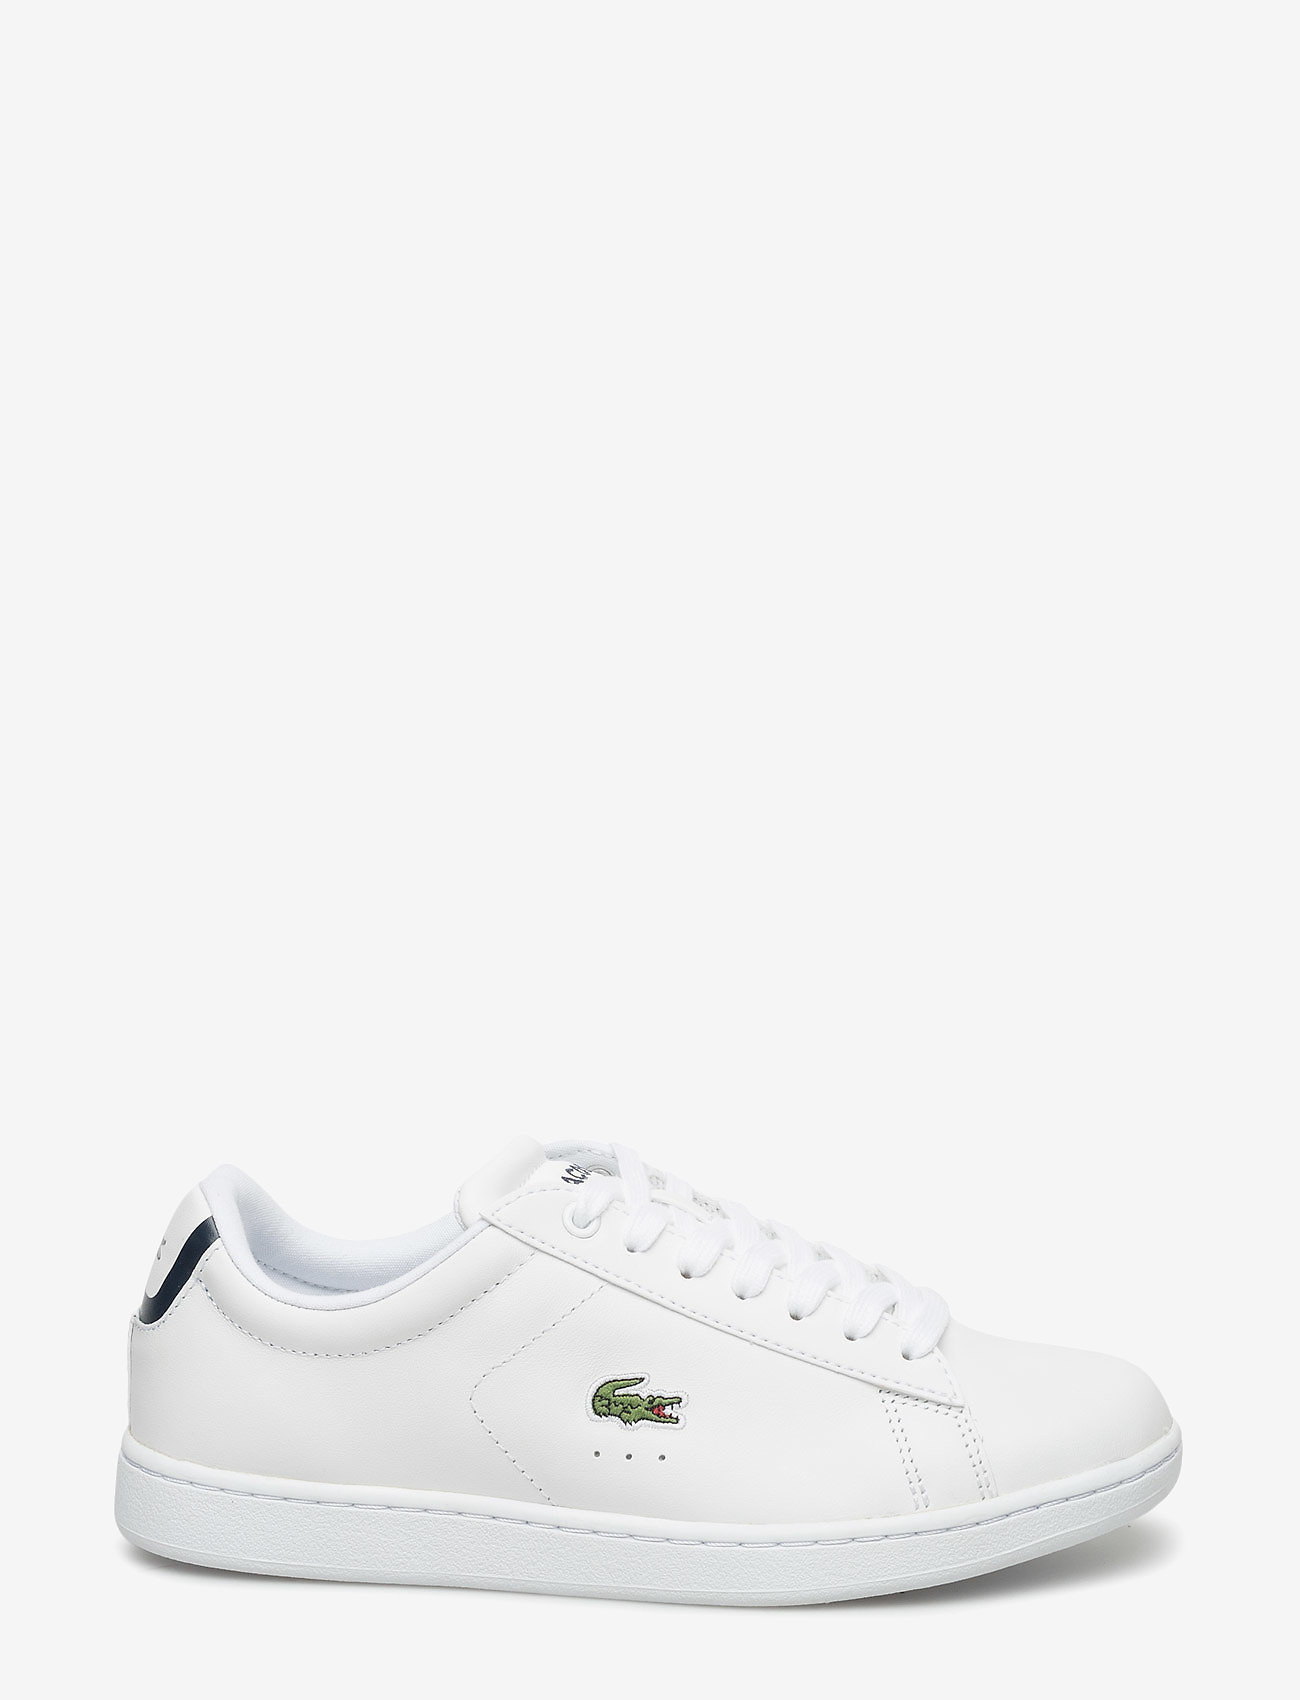 Lacoste Shoes - CARNABY EVO BL 1 SFA - low top sneakers - wht lth - 1